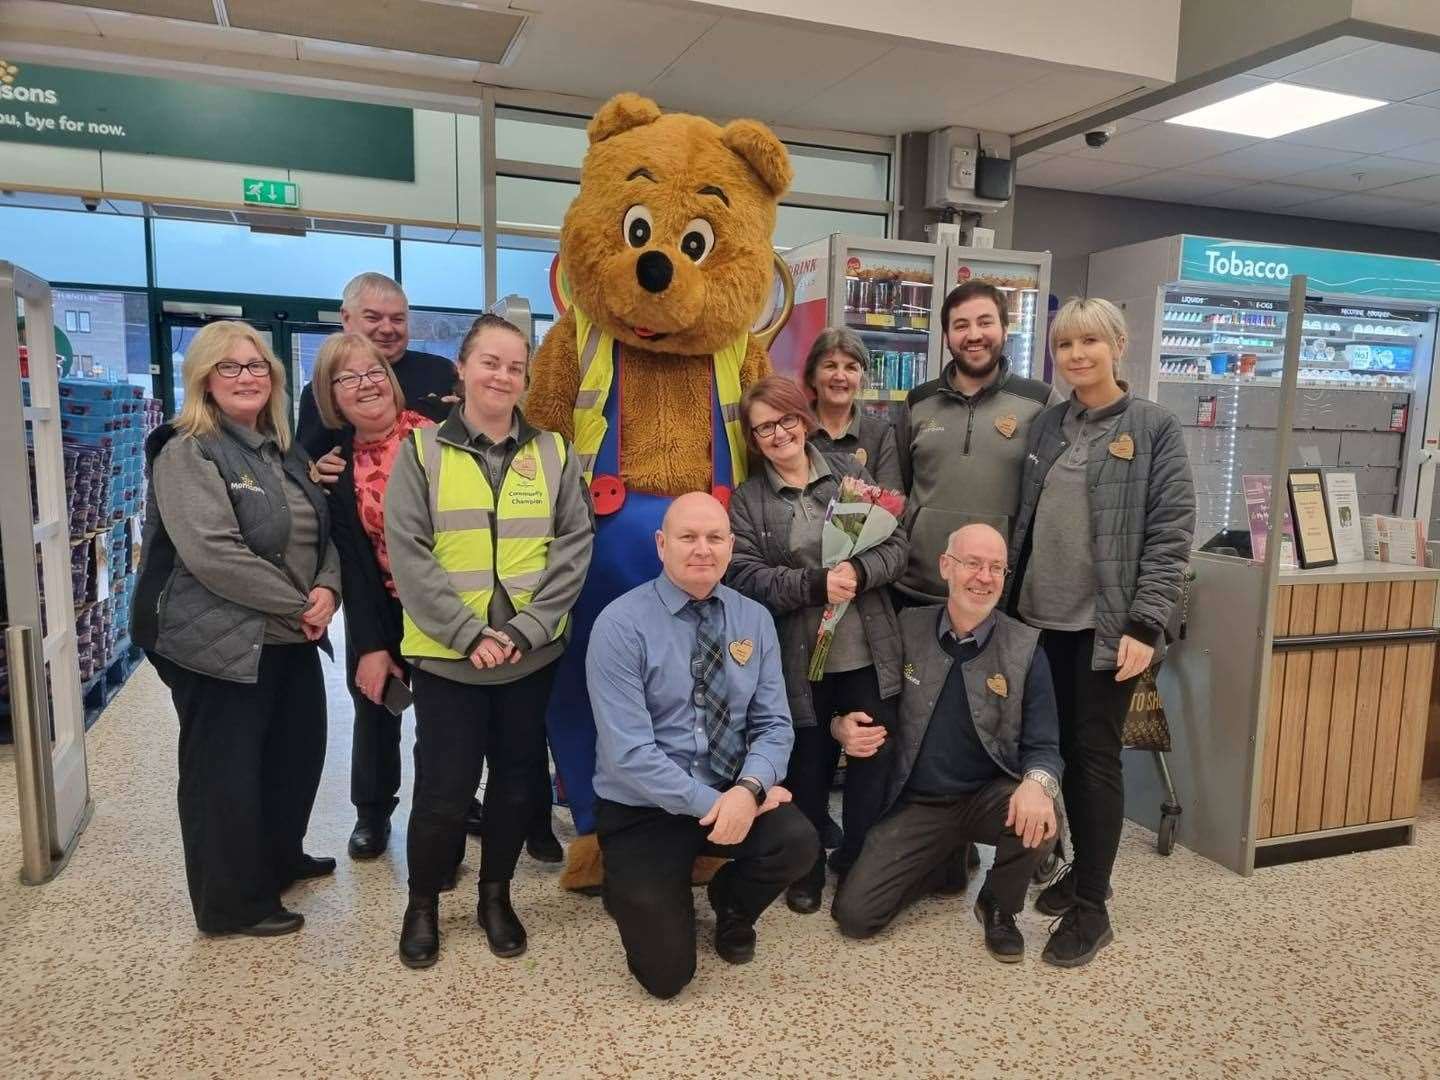 Morrisons staff welcomed the BID bears for the occasion.